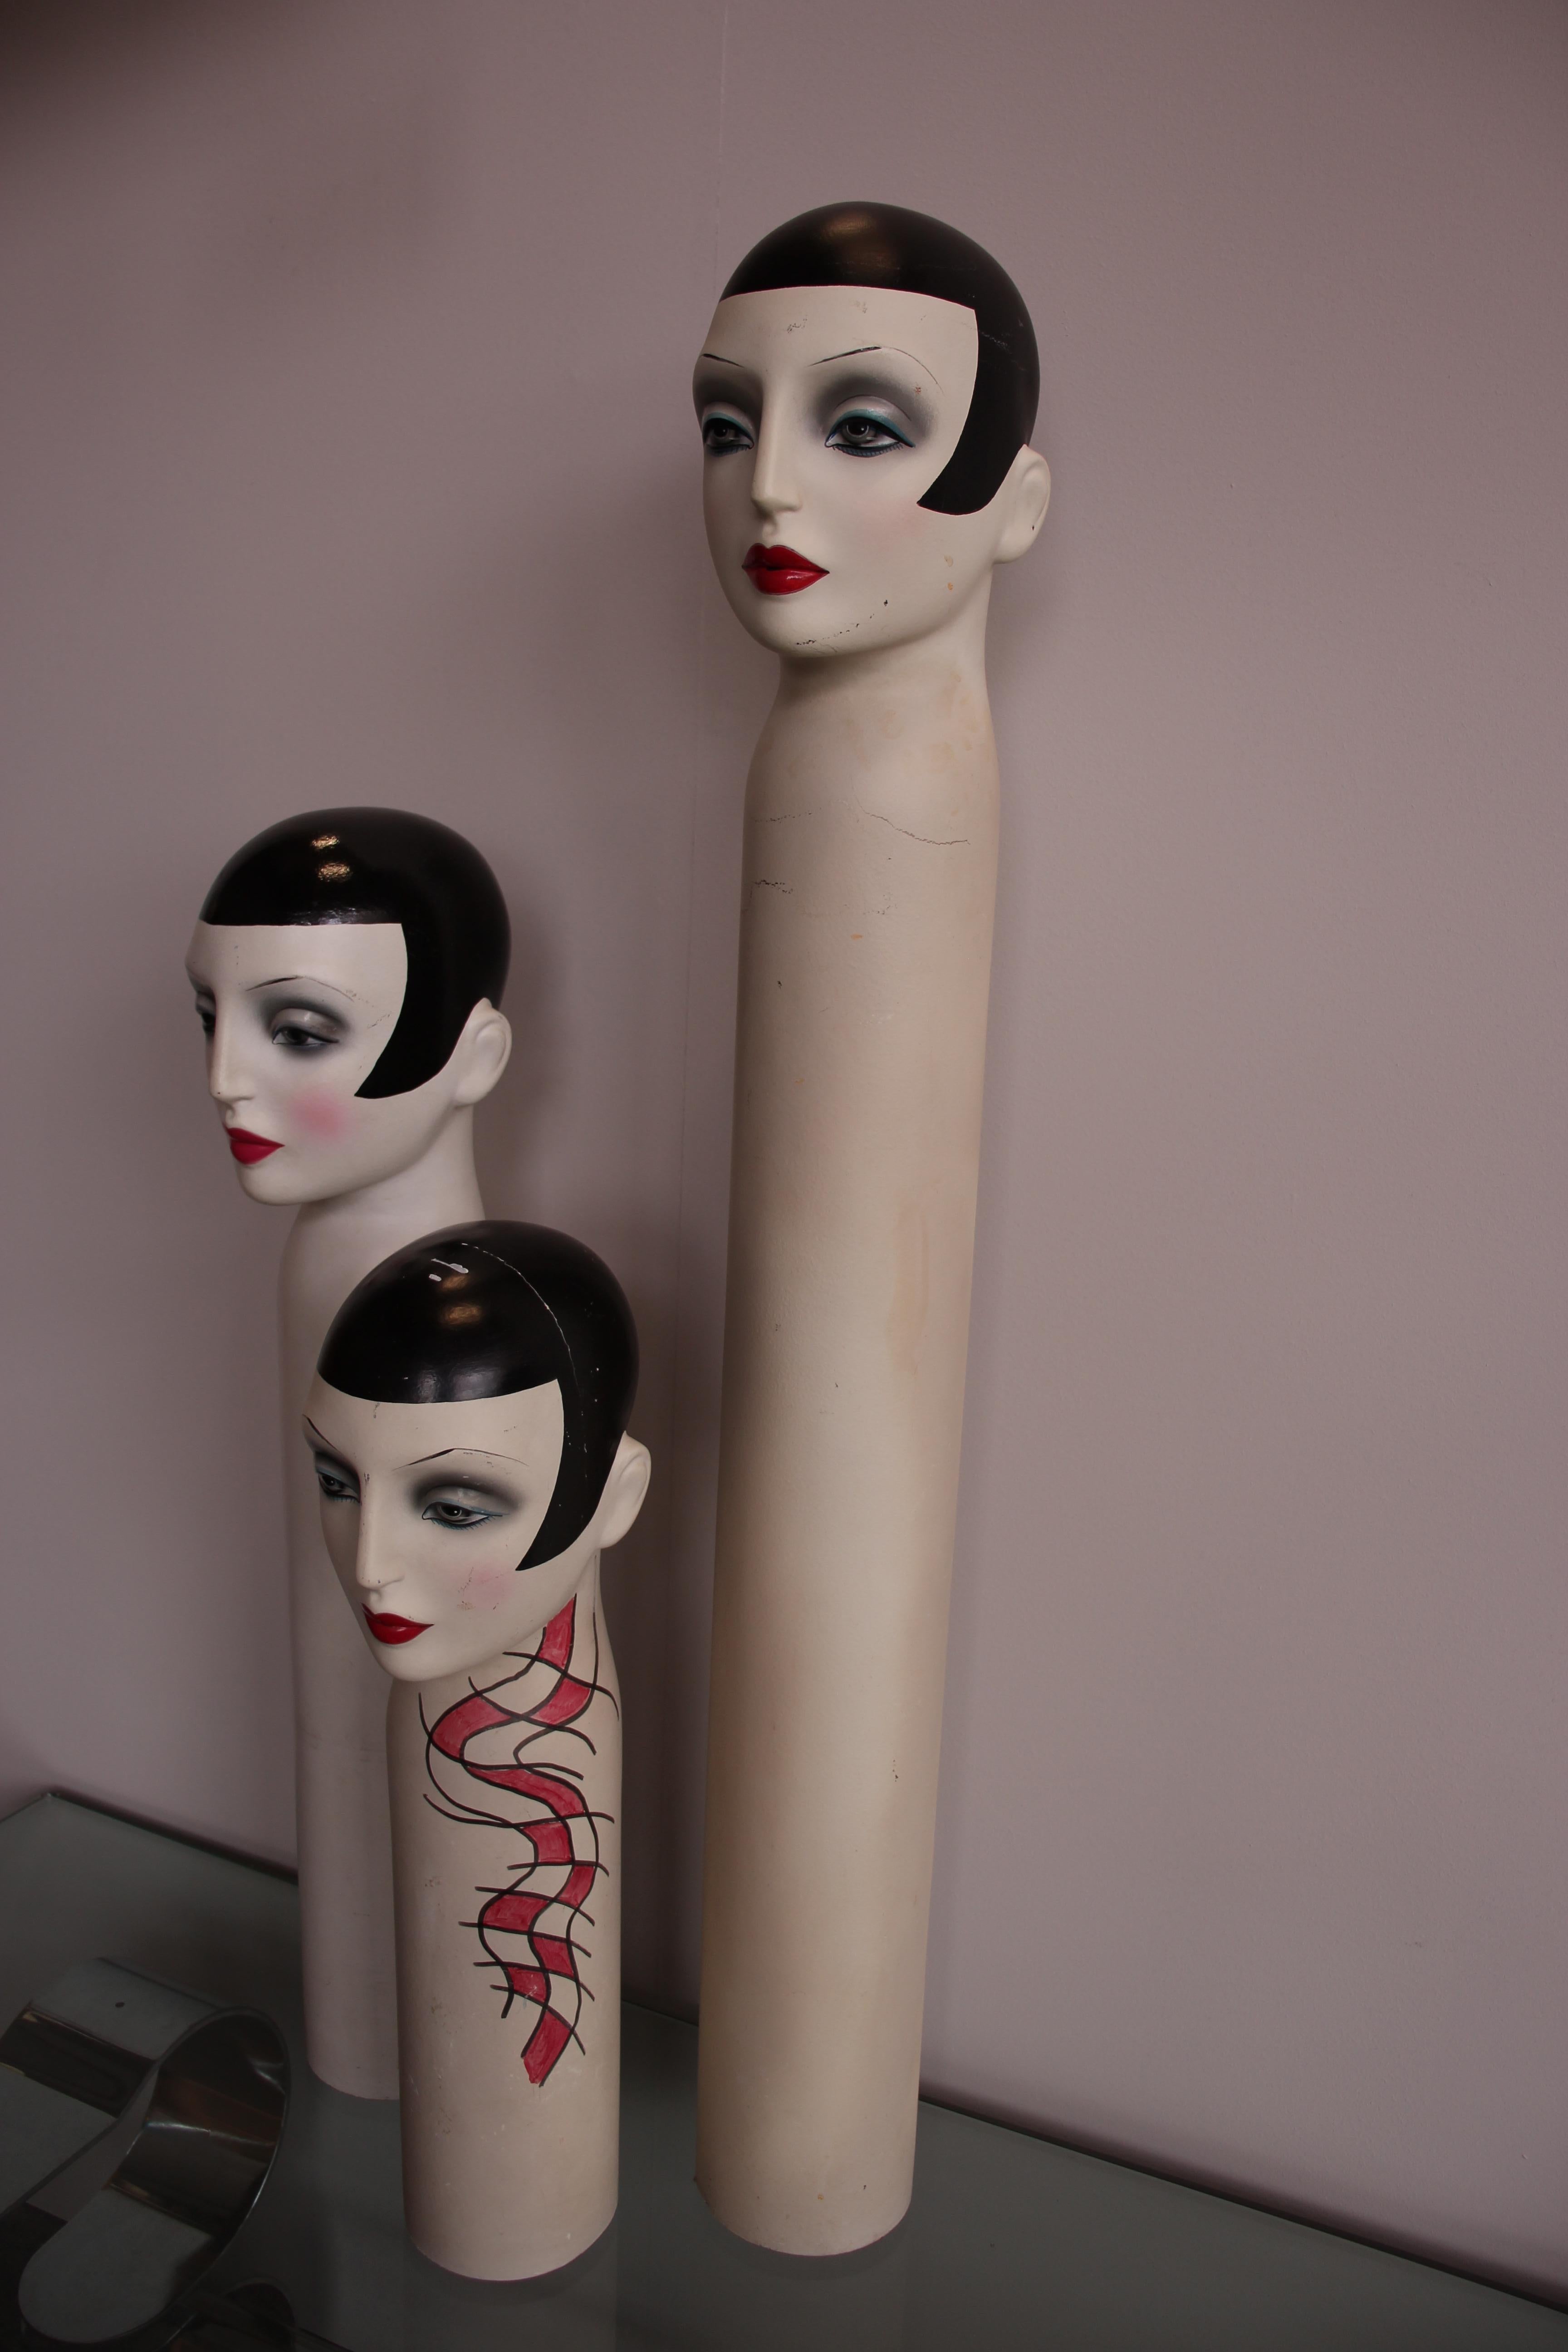 Mid-Century Modern Advertising Figures, Mannequins for Hats and Scarves from the 1950s